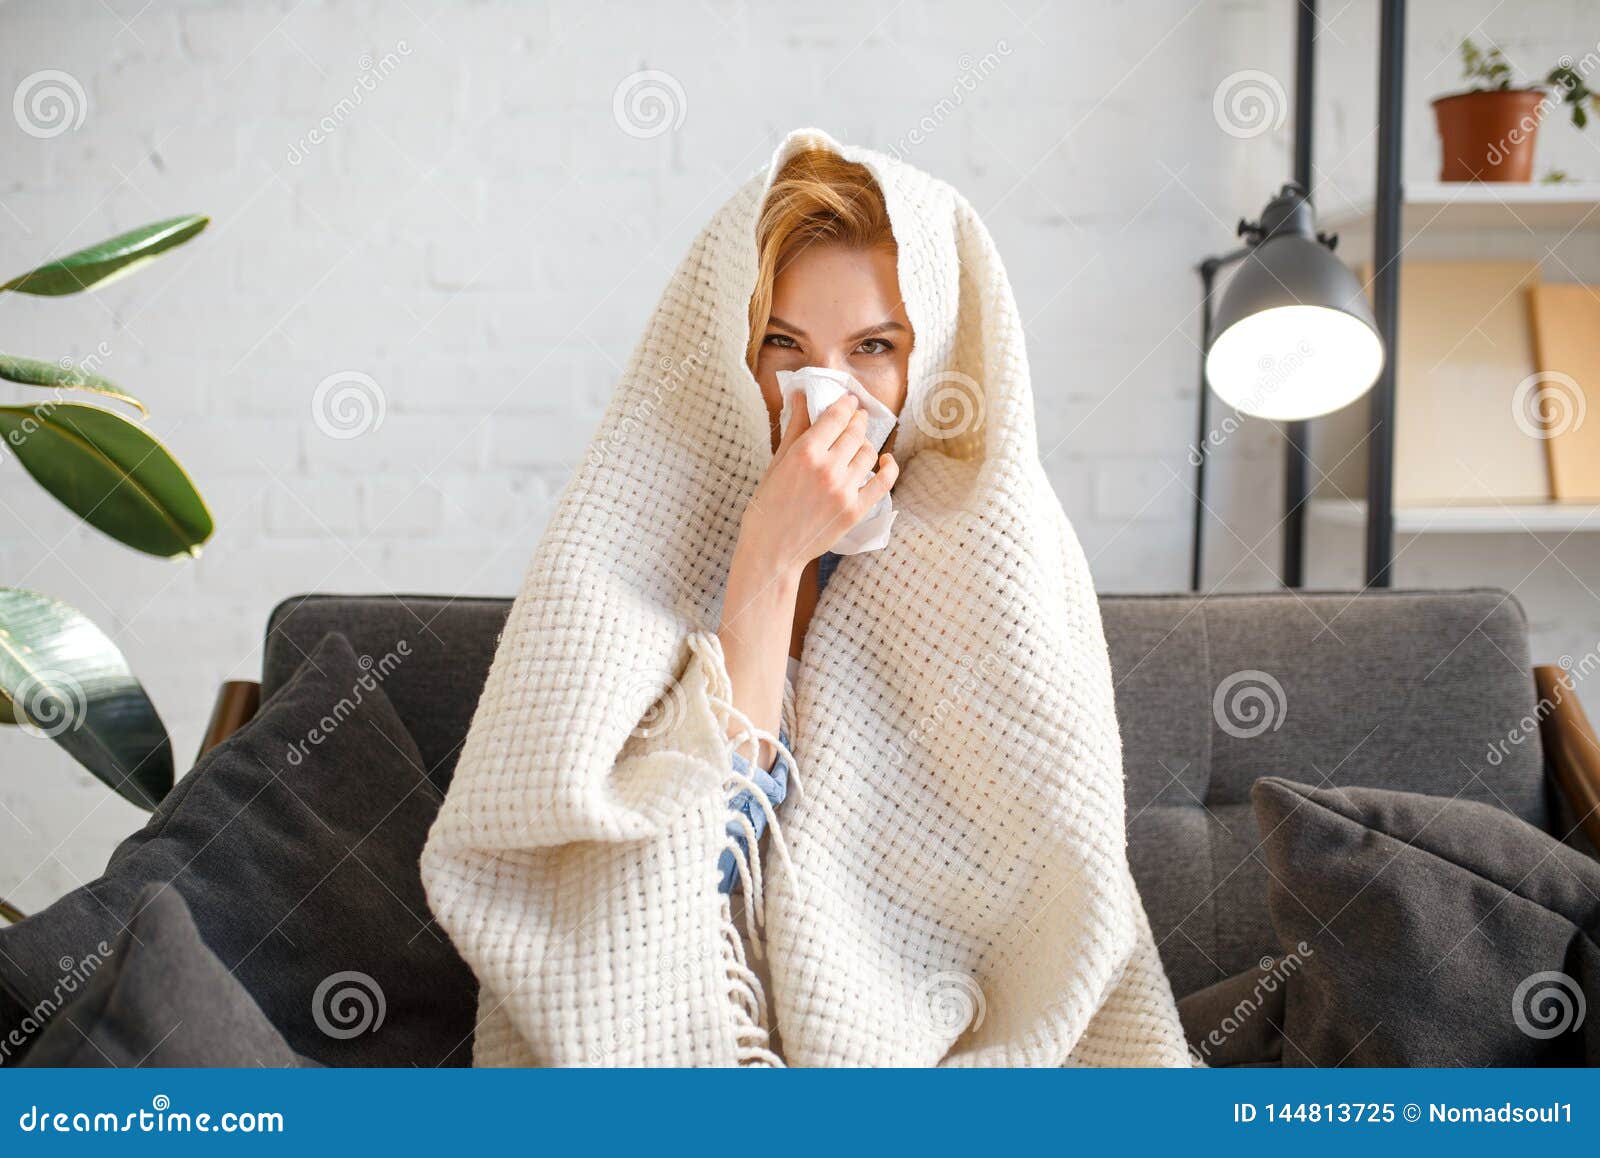 Sick Woman Sitting with Kerchief Under the Blanket Stock Image - Image ...